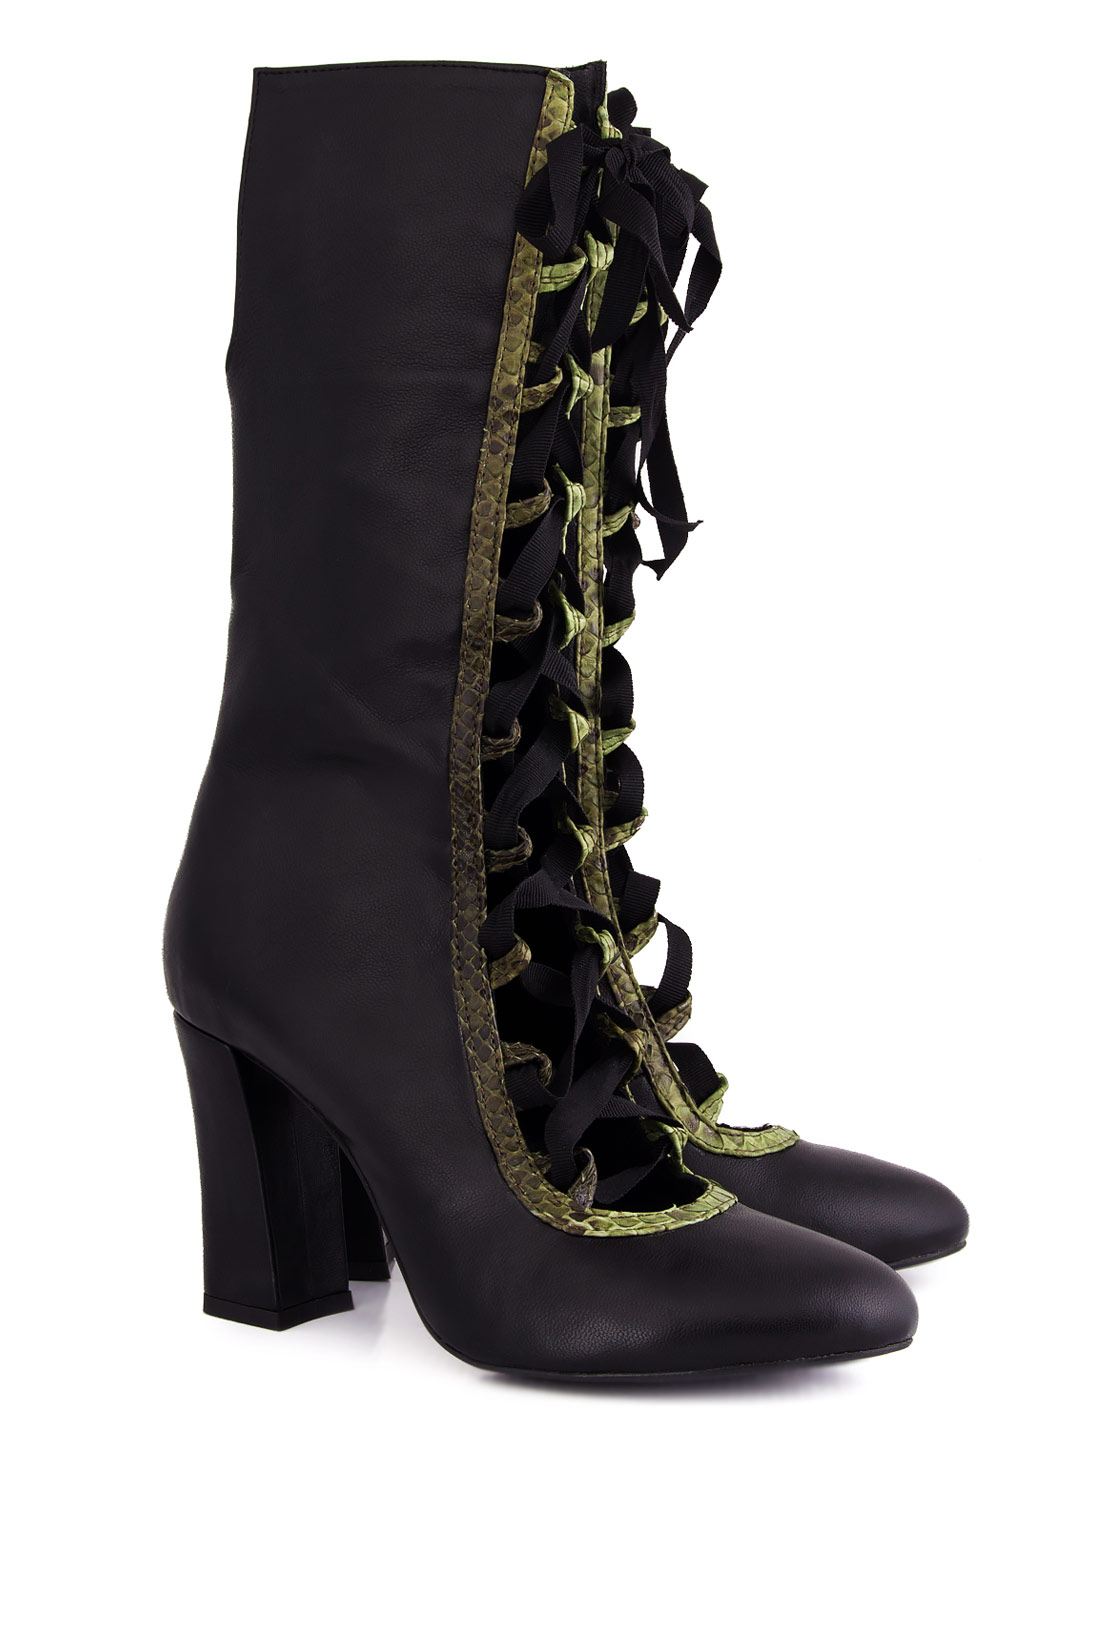 Lace-up python and leather boots Ana Kaloni image 1